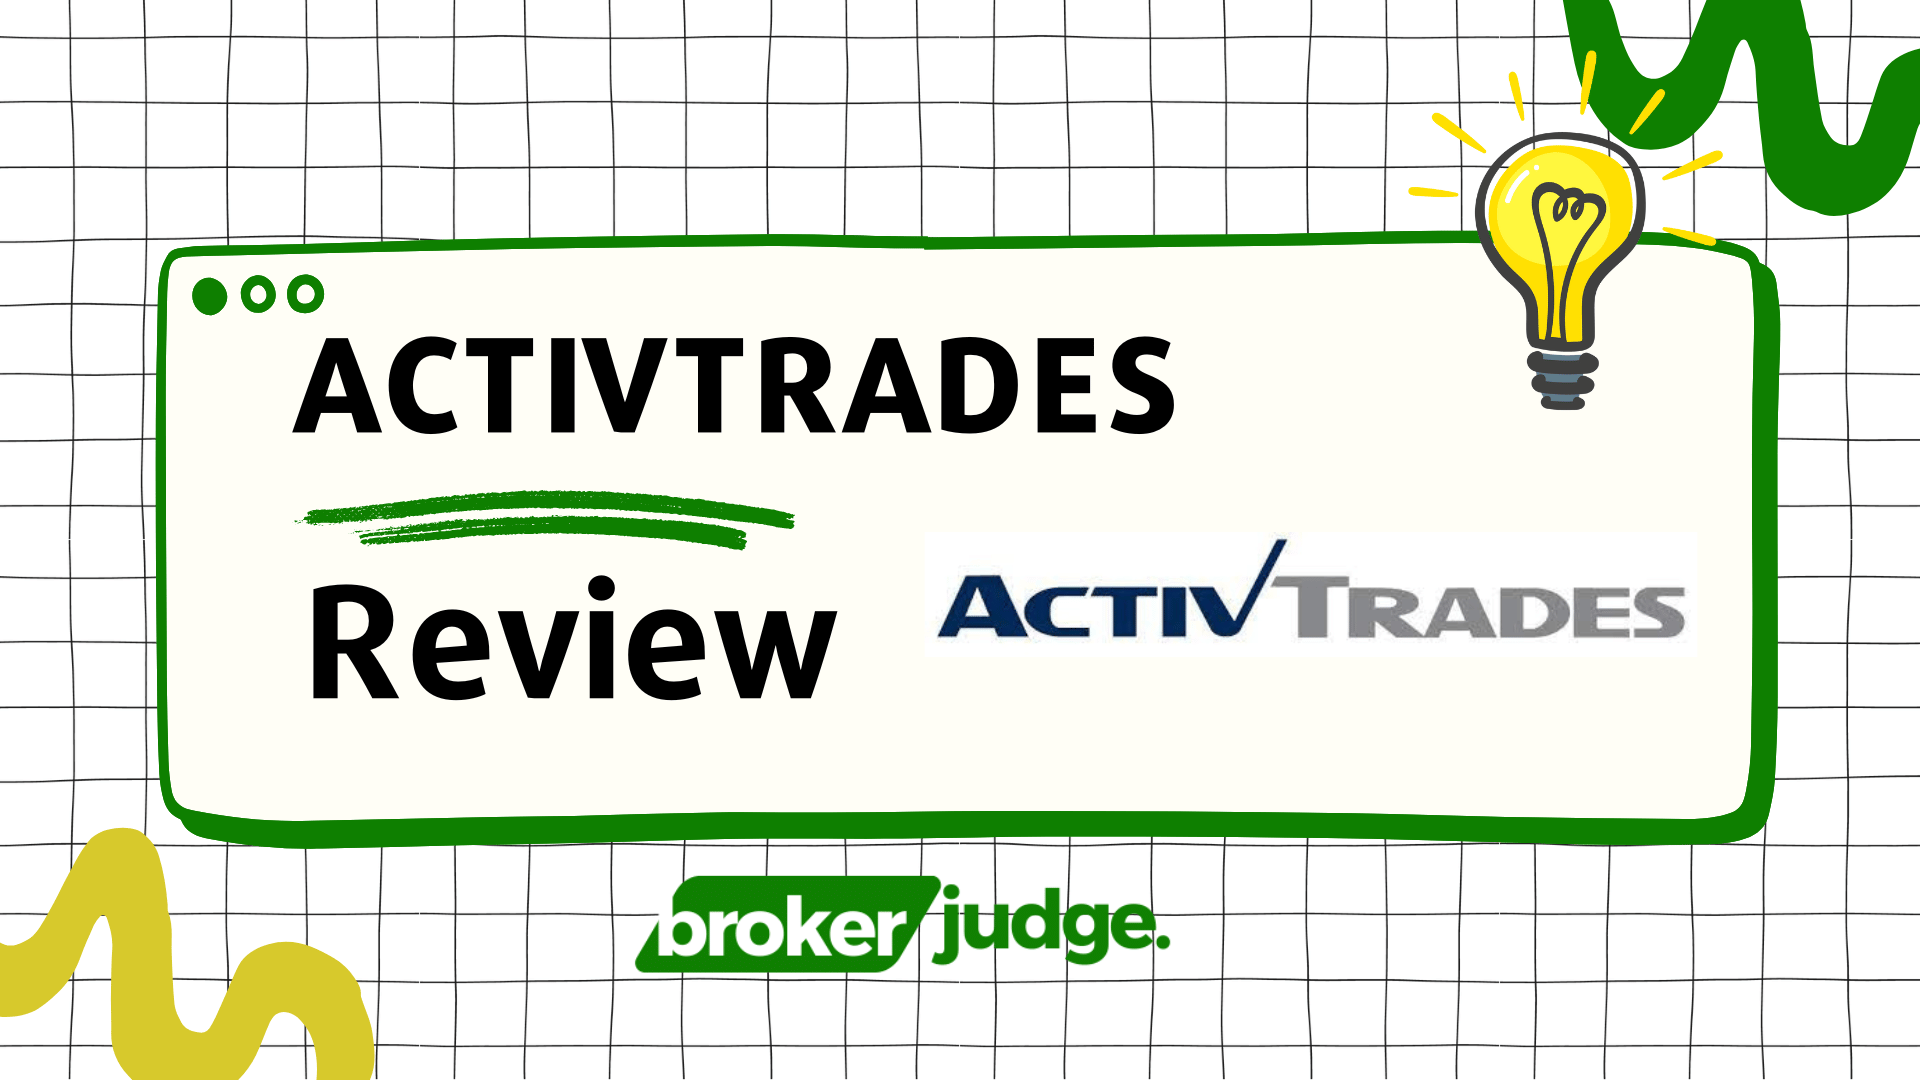 ActivTrades Review 2024